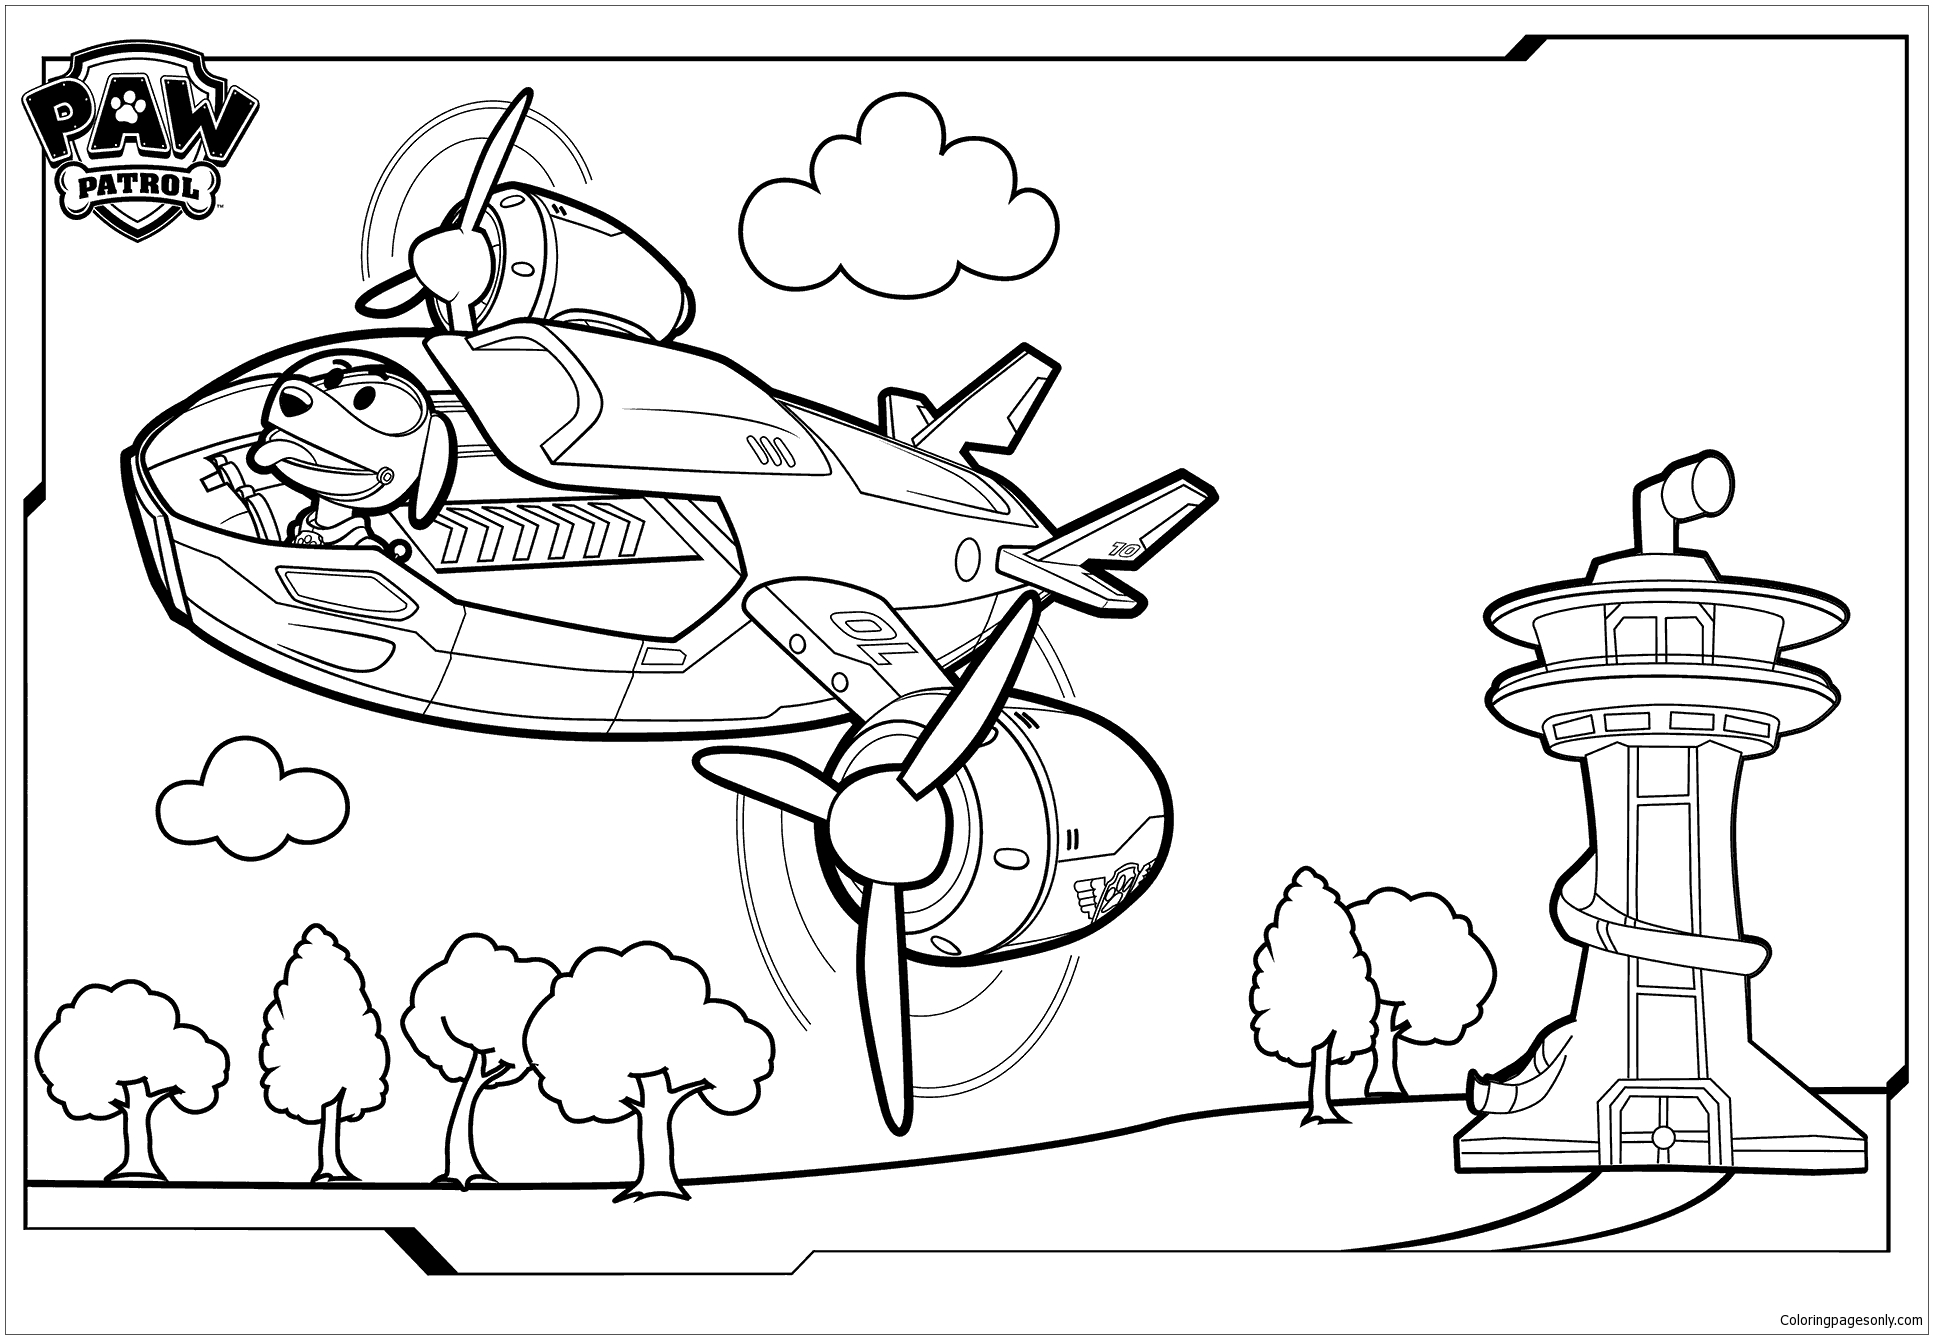 Robo Dog in Air Coloring Pages